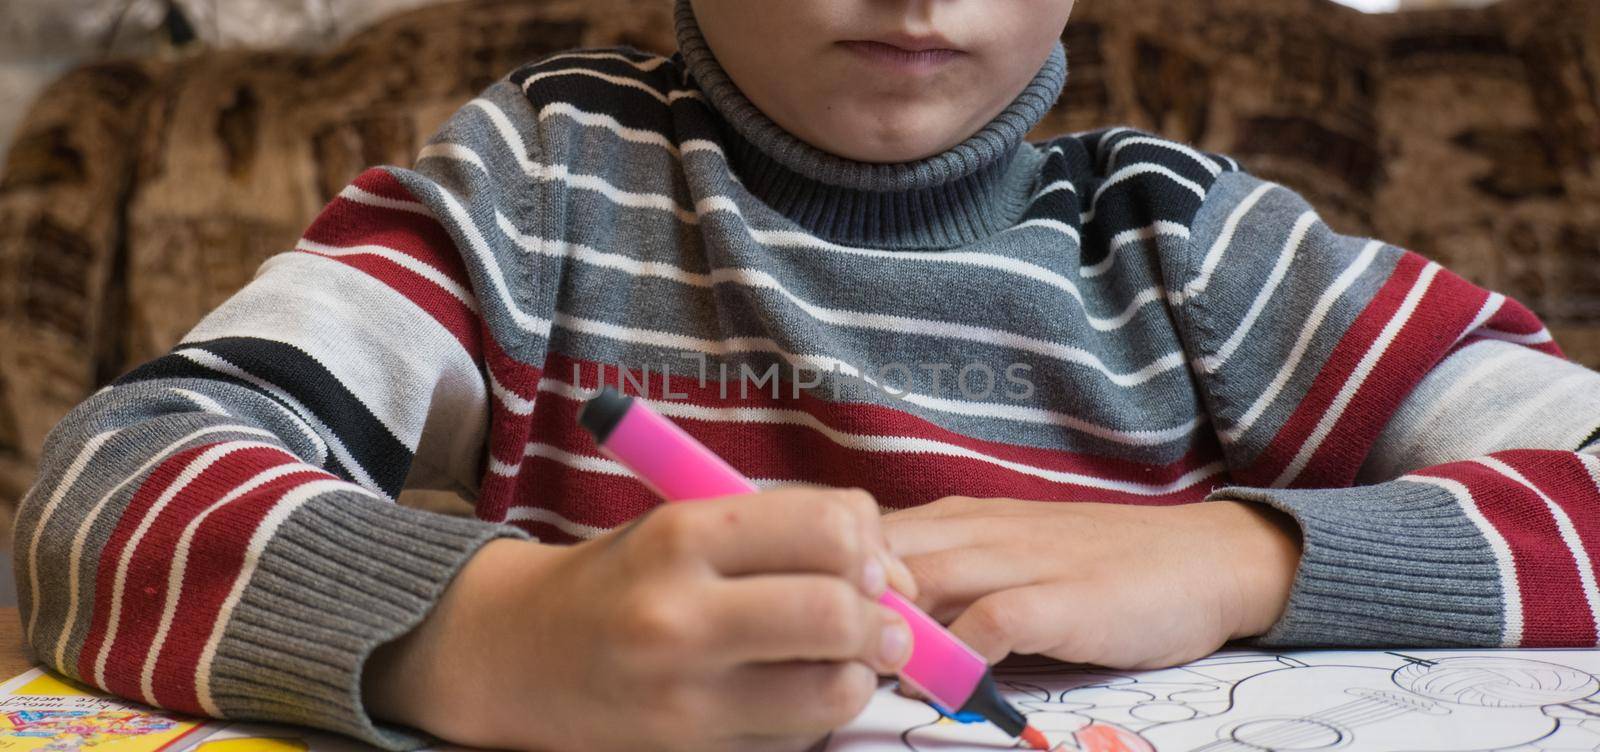 A little boy paints a coloring with crayons and felt-tip pens on a wooden table at home.